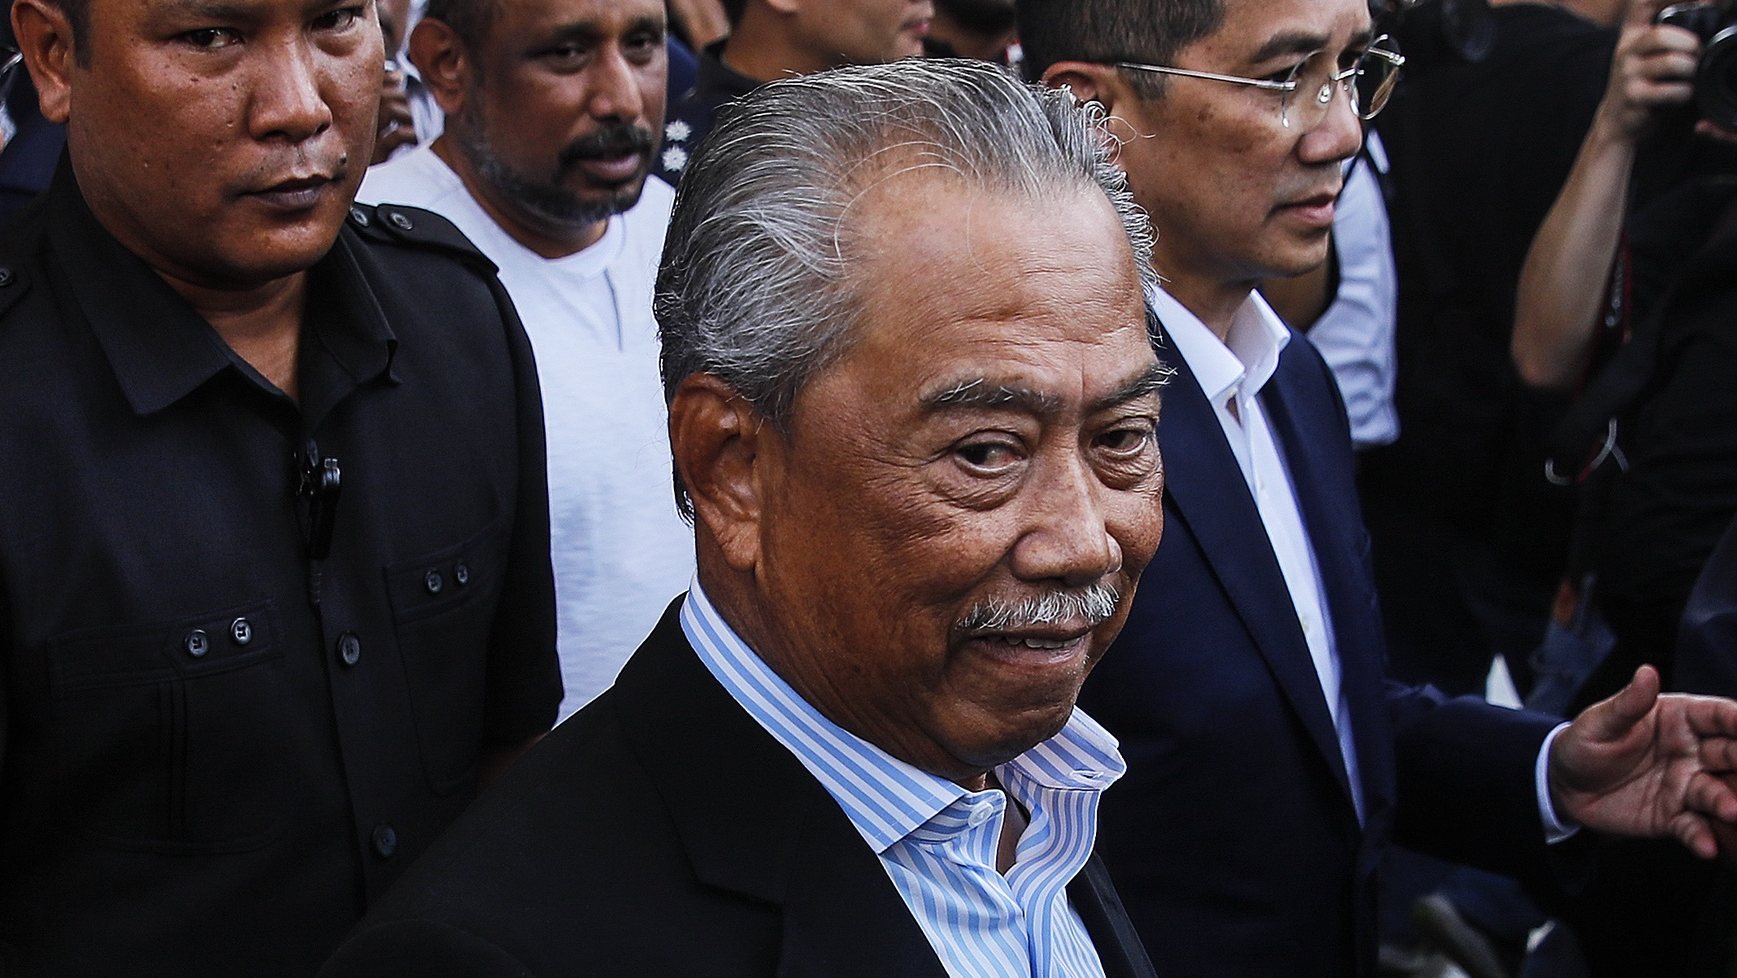 epa10512911 Former Malaysia Prime Minister and Perikatan Nasional (PN) chairman Muhyiddin Yassin leaves Kuala Lumpur High Court, in Kuala Lumpur, Malaysia, 10 March 2023. Muhyiddin has been charged with four counts of abuse of power and two counts of money laundering over economic projects awarded under Jana Wibawa, a COVID-19 stimulus initiative which was introduced when he was Prime Minister. He claimed innocence against all charges in a statement on 10 March.  EPA/FAZRY ISMAIL